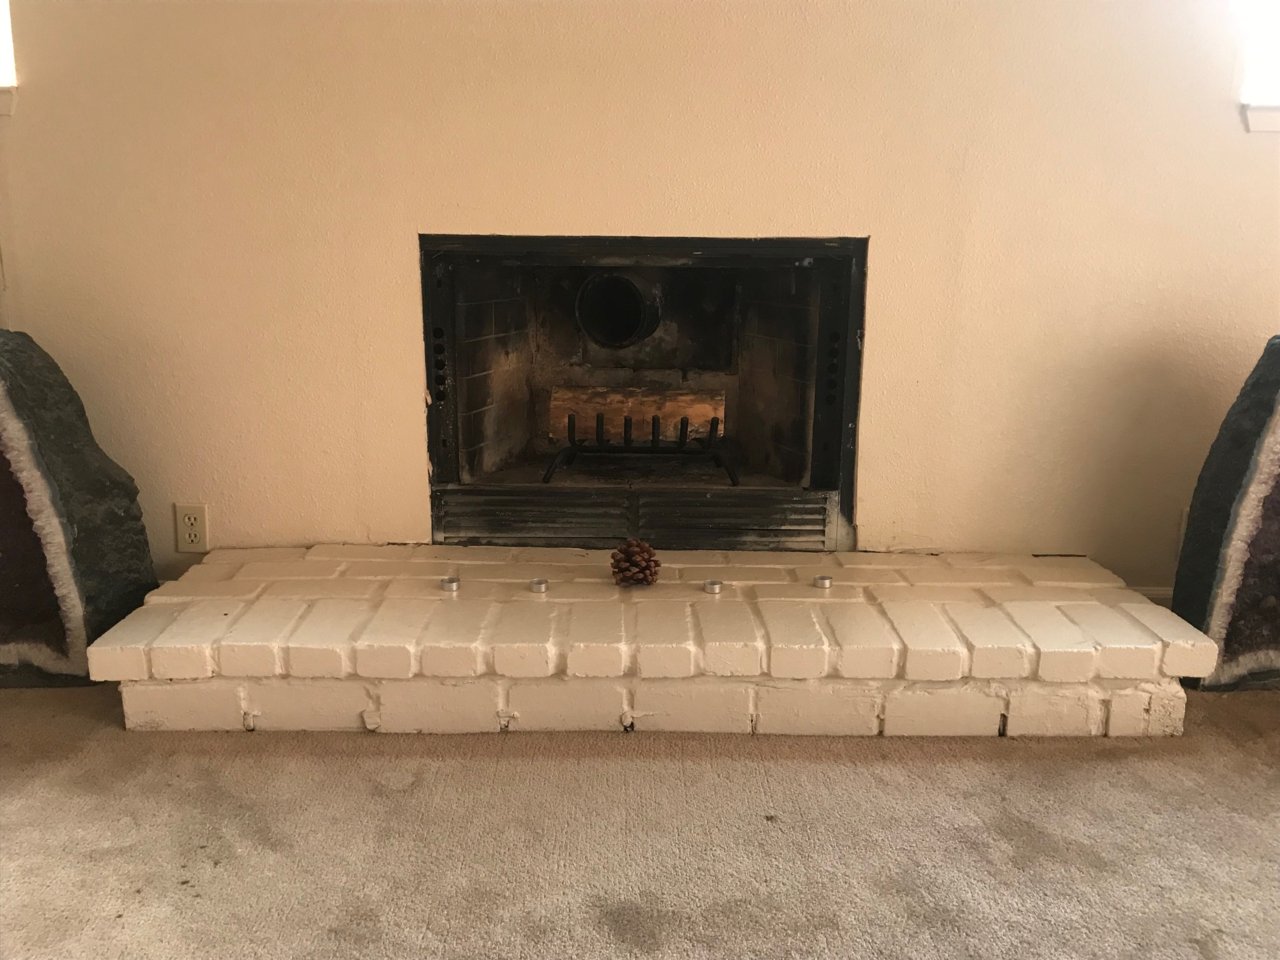 zc fireplace with hearth